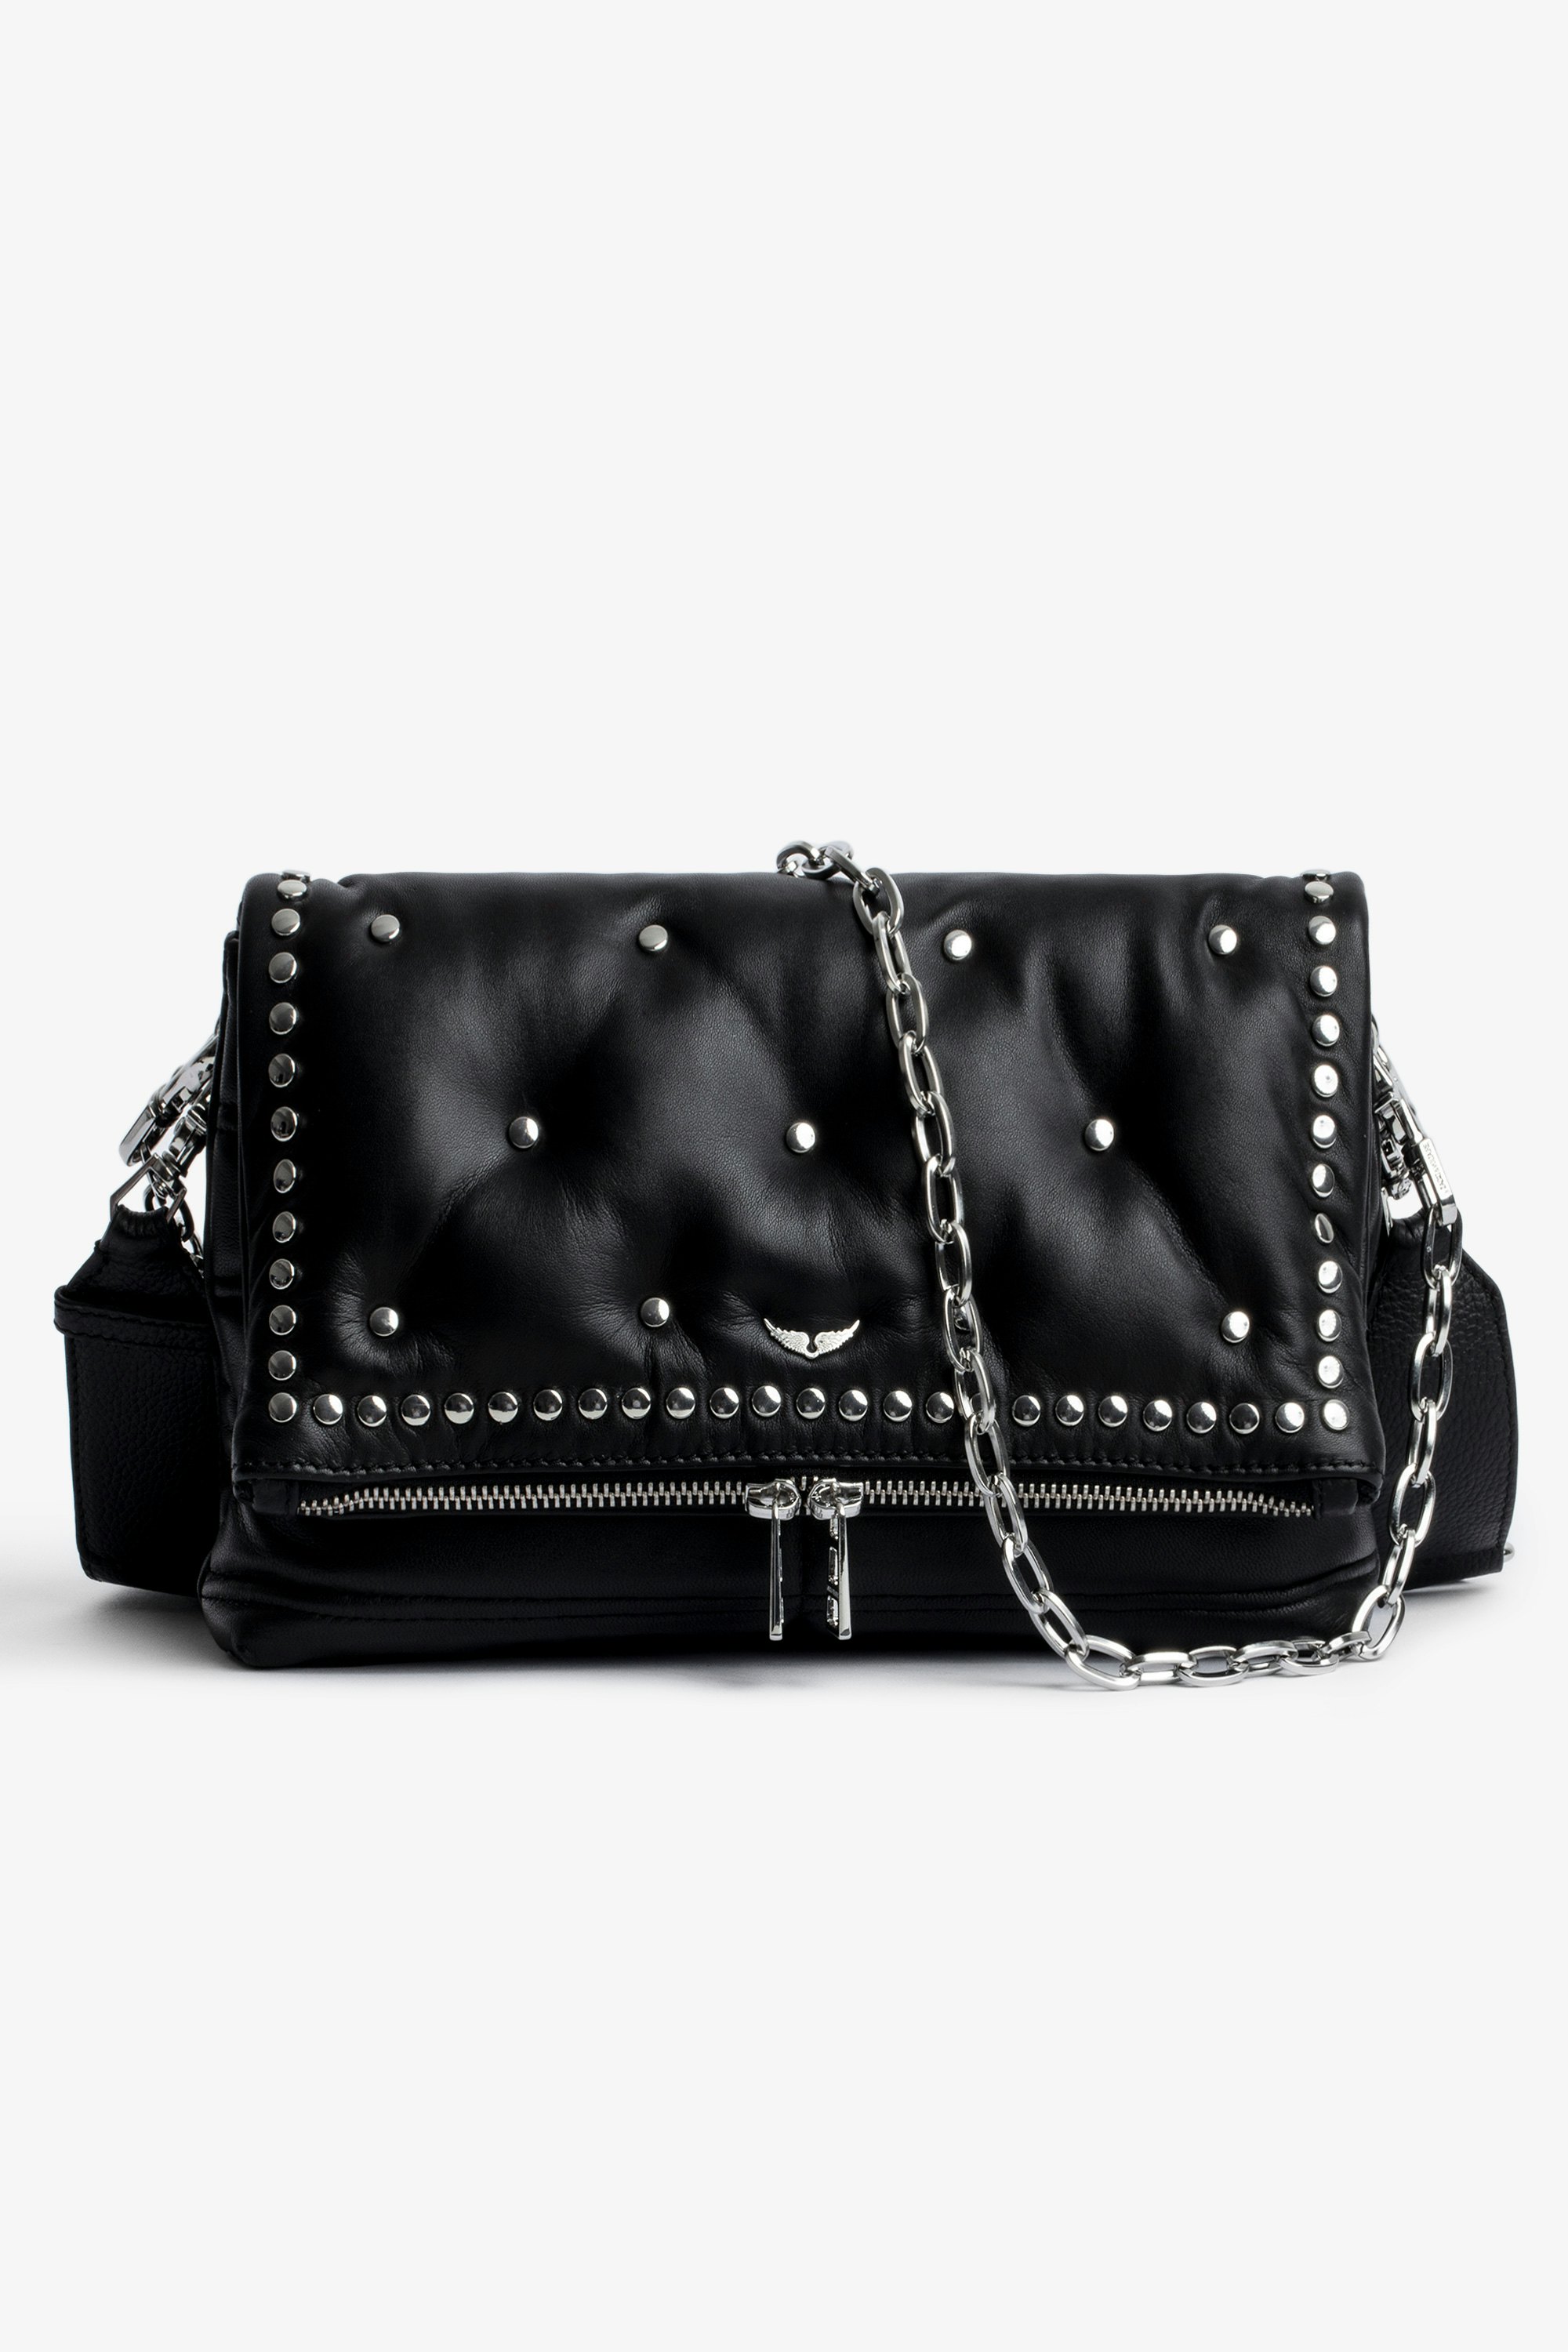 Rocky Rider バッグ Women’s black leather bag with studs and a shoulder strap